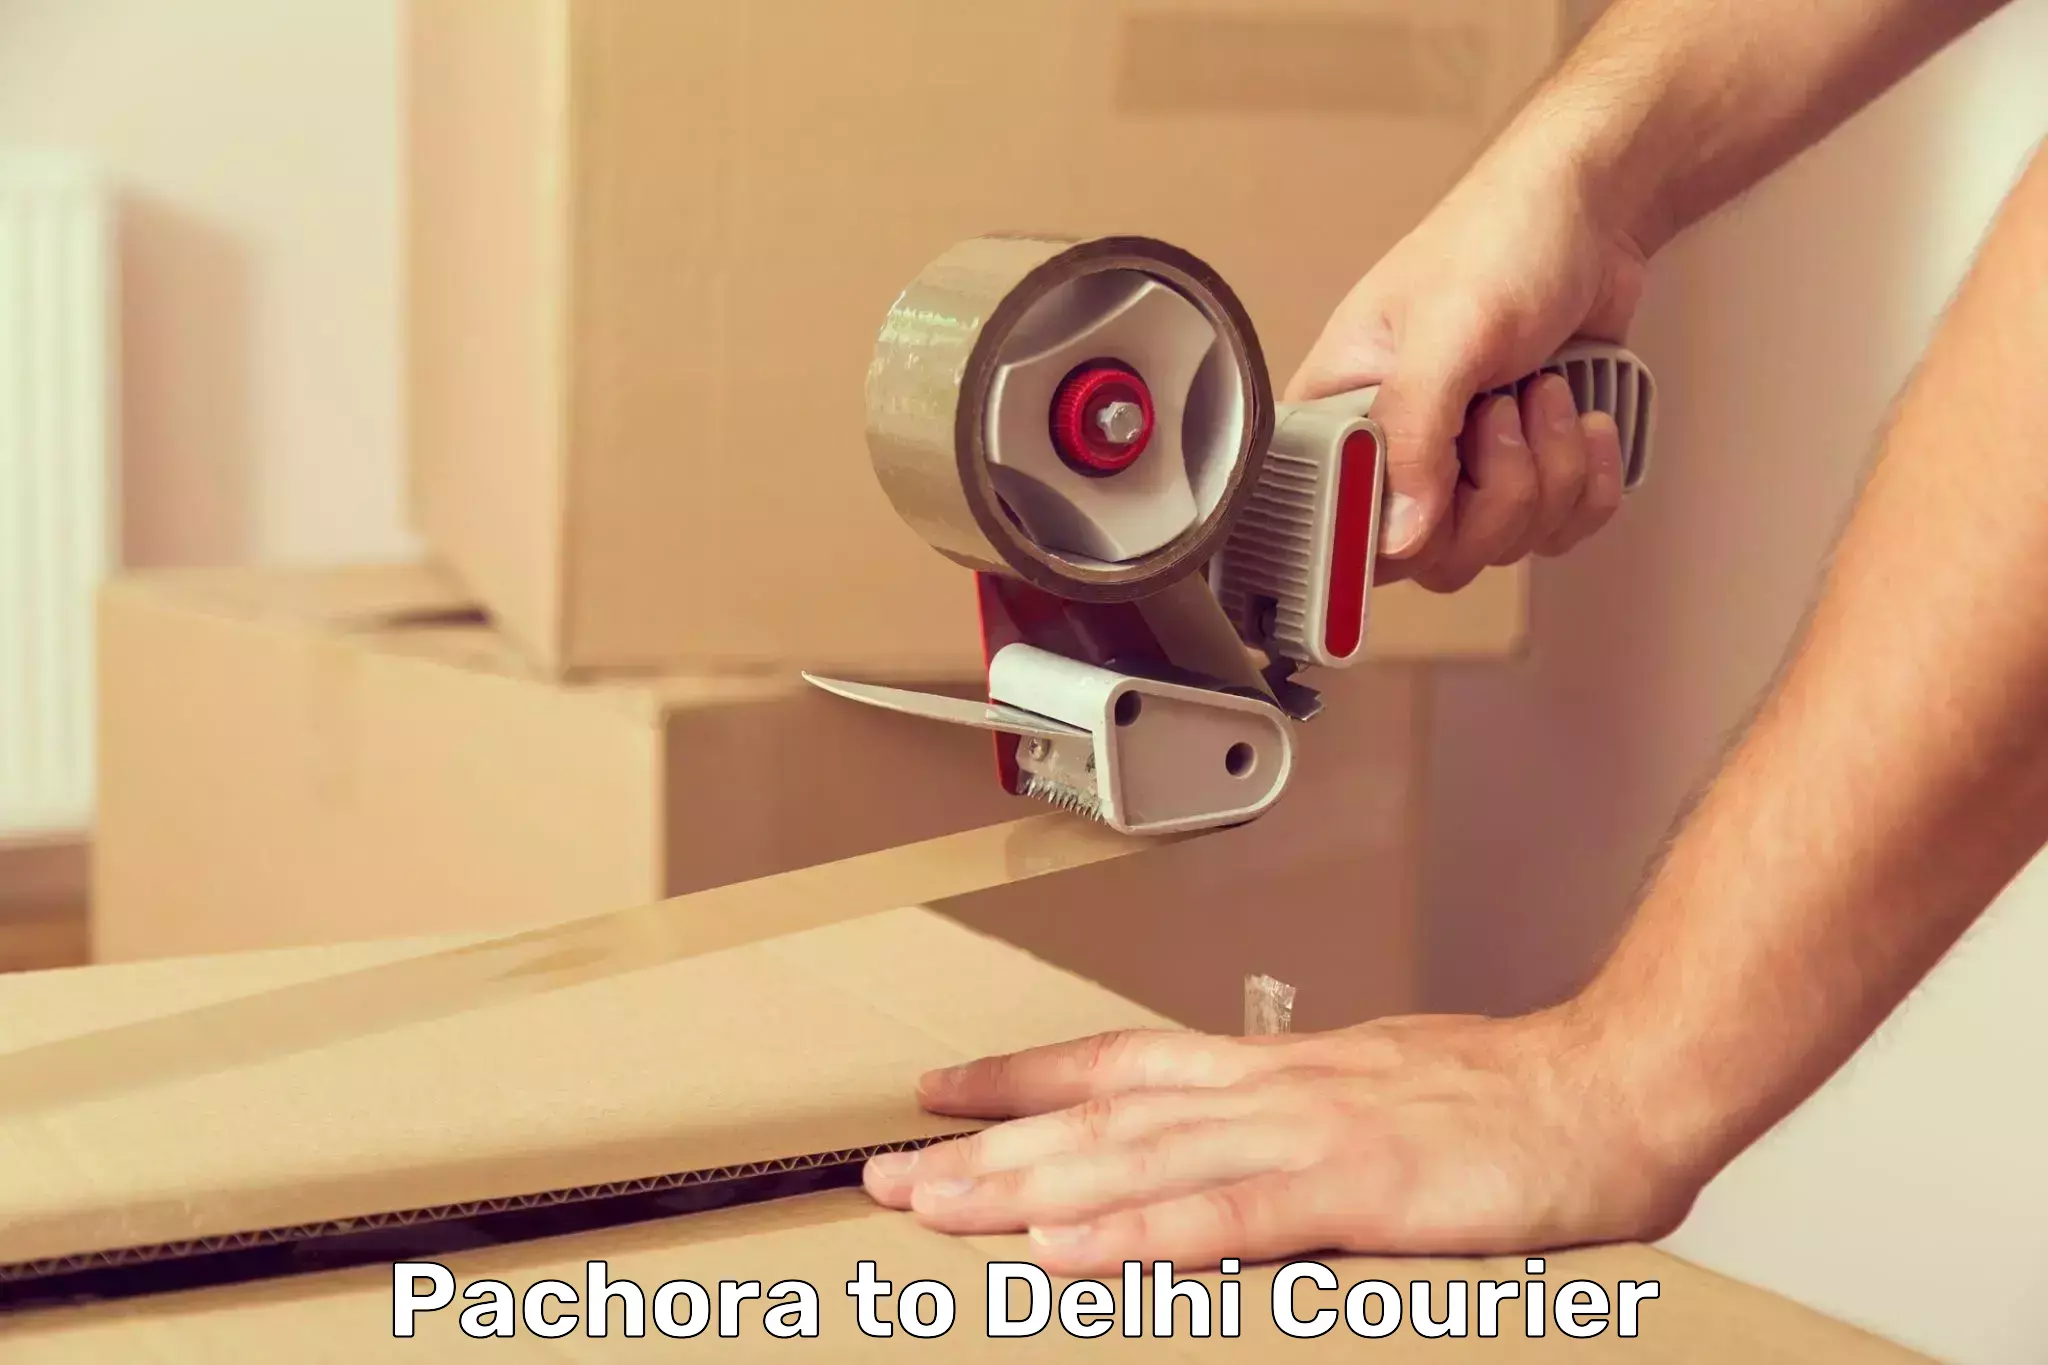 24/7 courier service Pachora to Lodhi Road